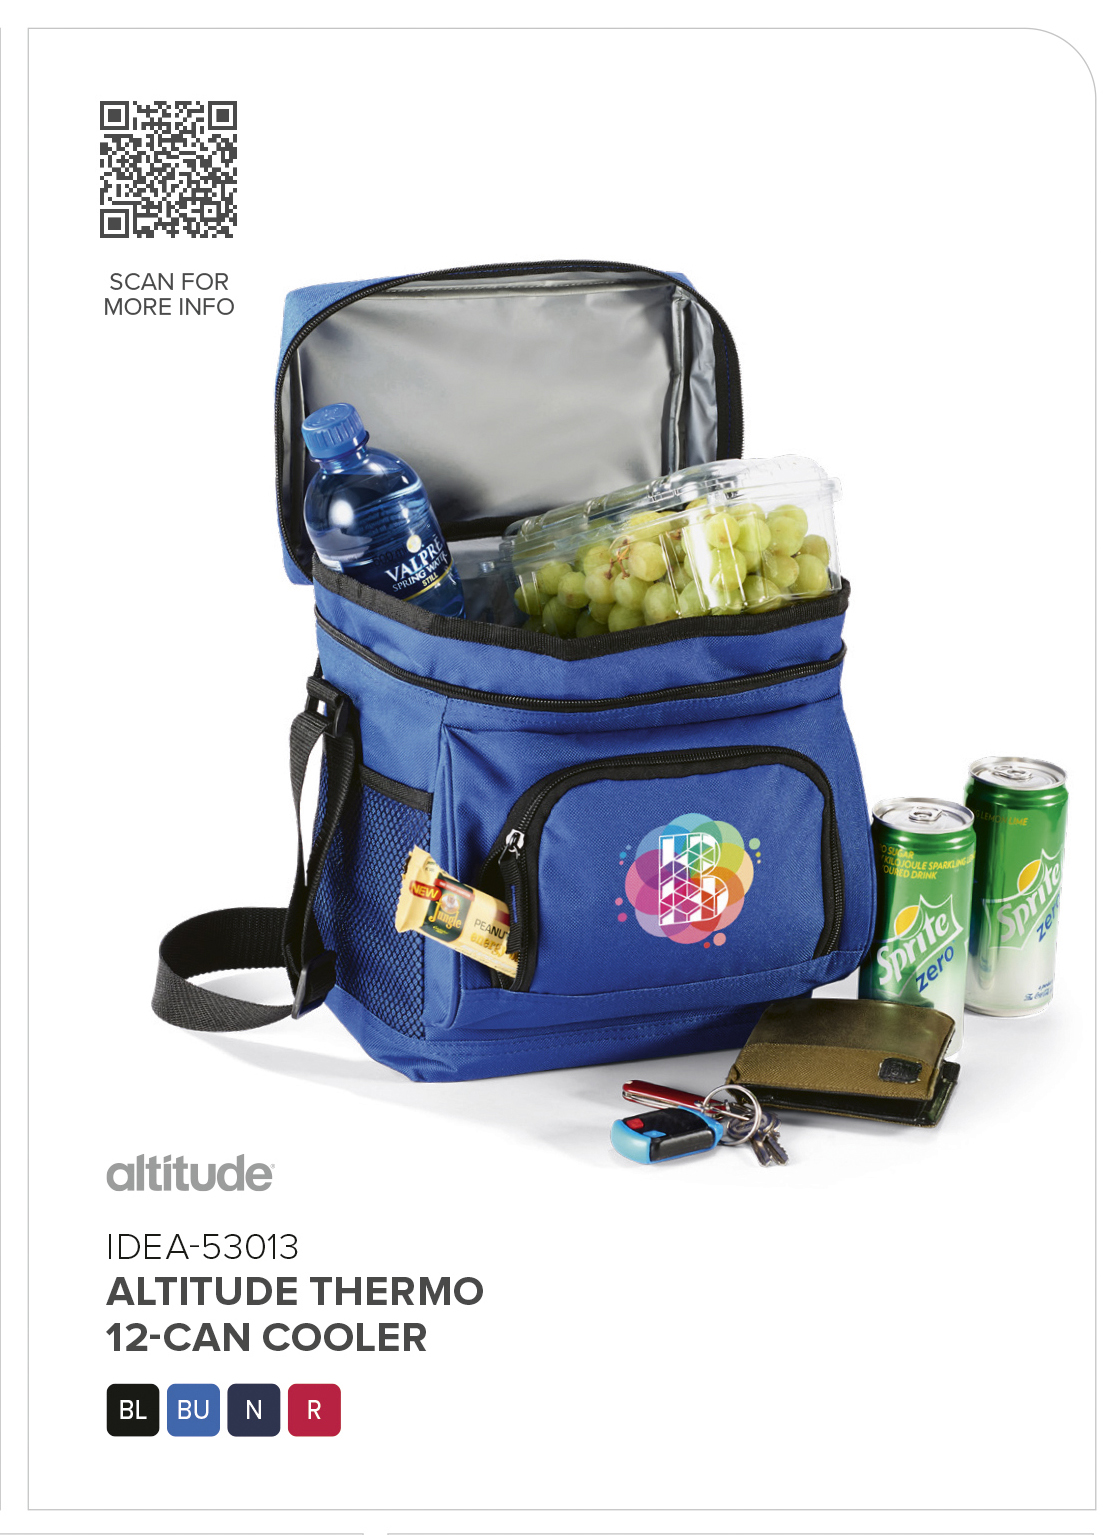 Altitude Thermo 12-Can Cooler